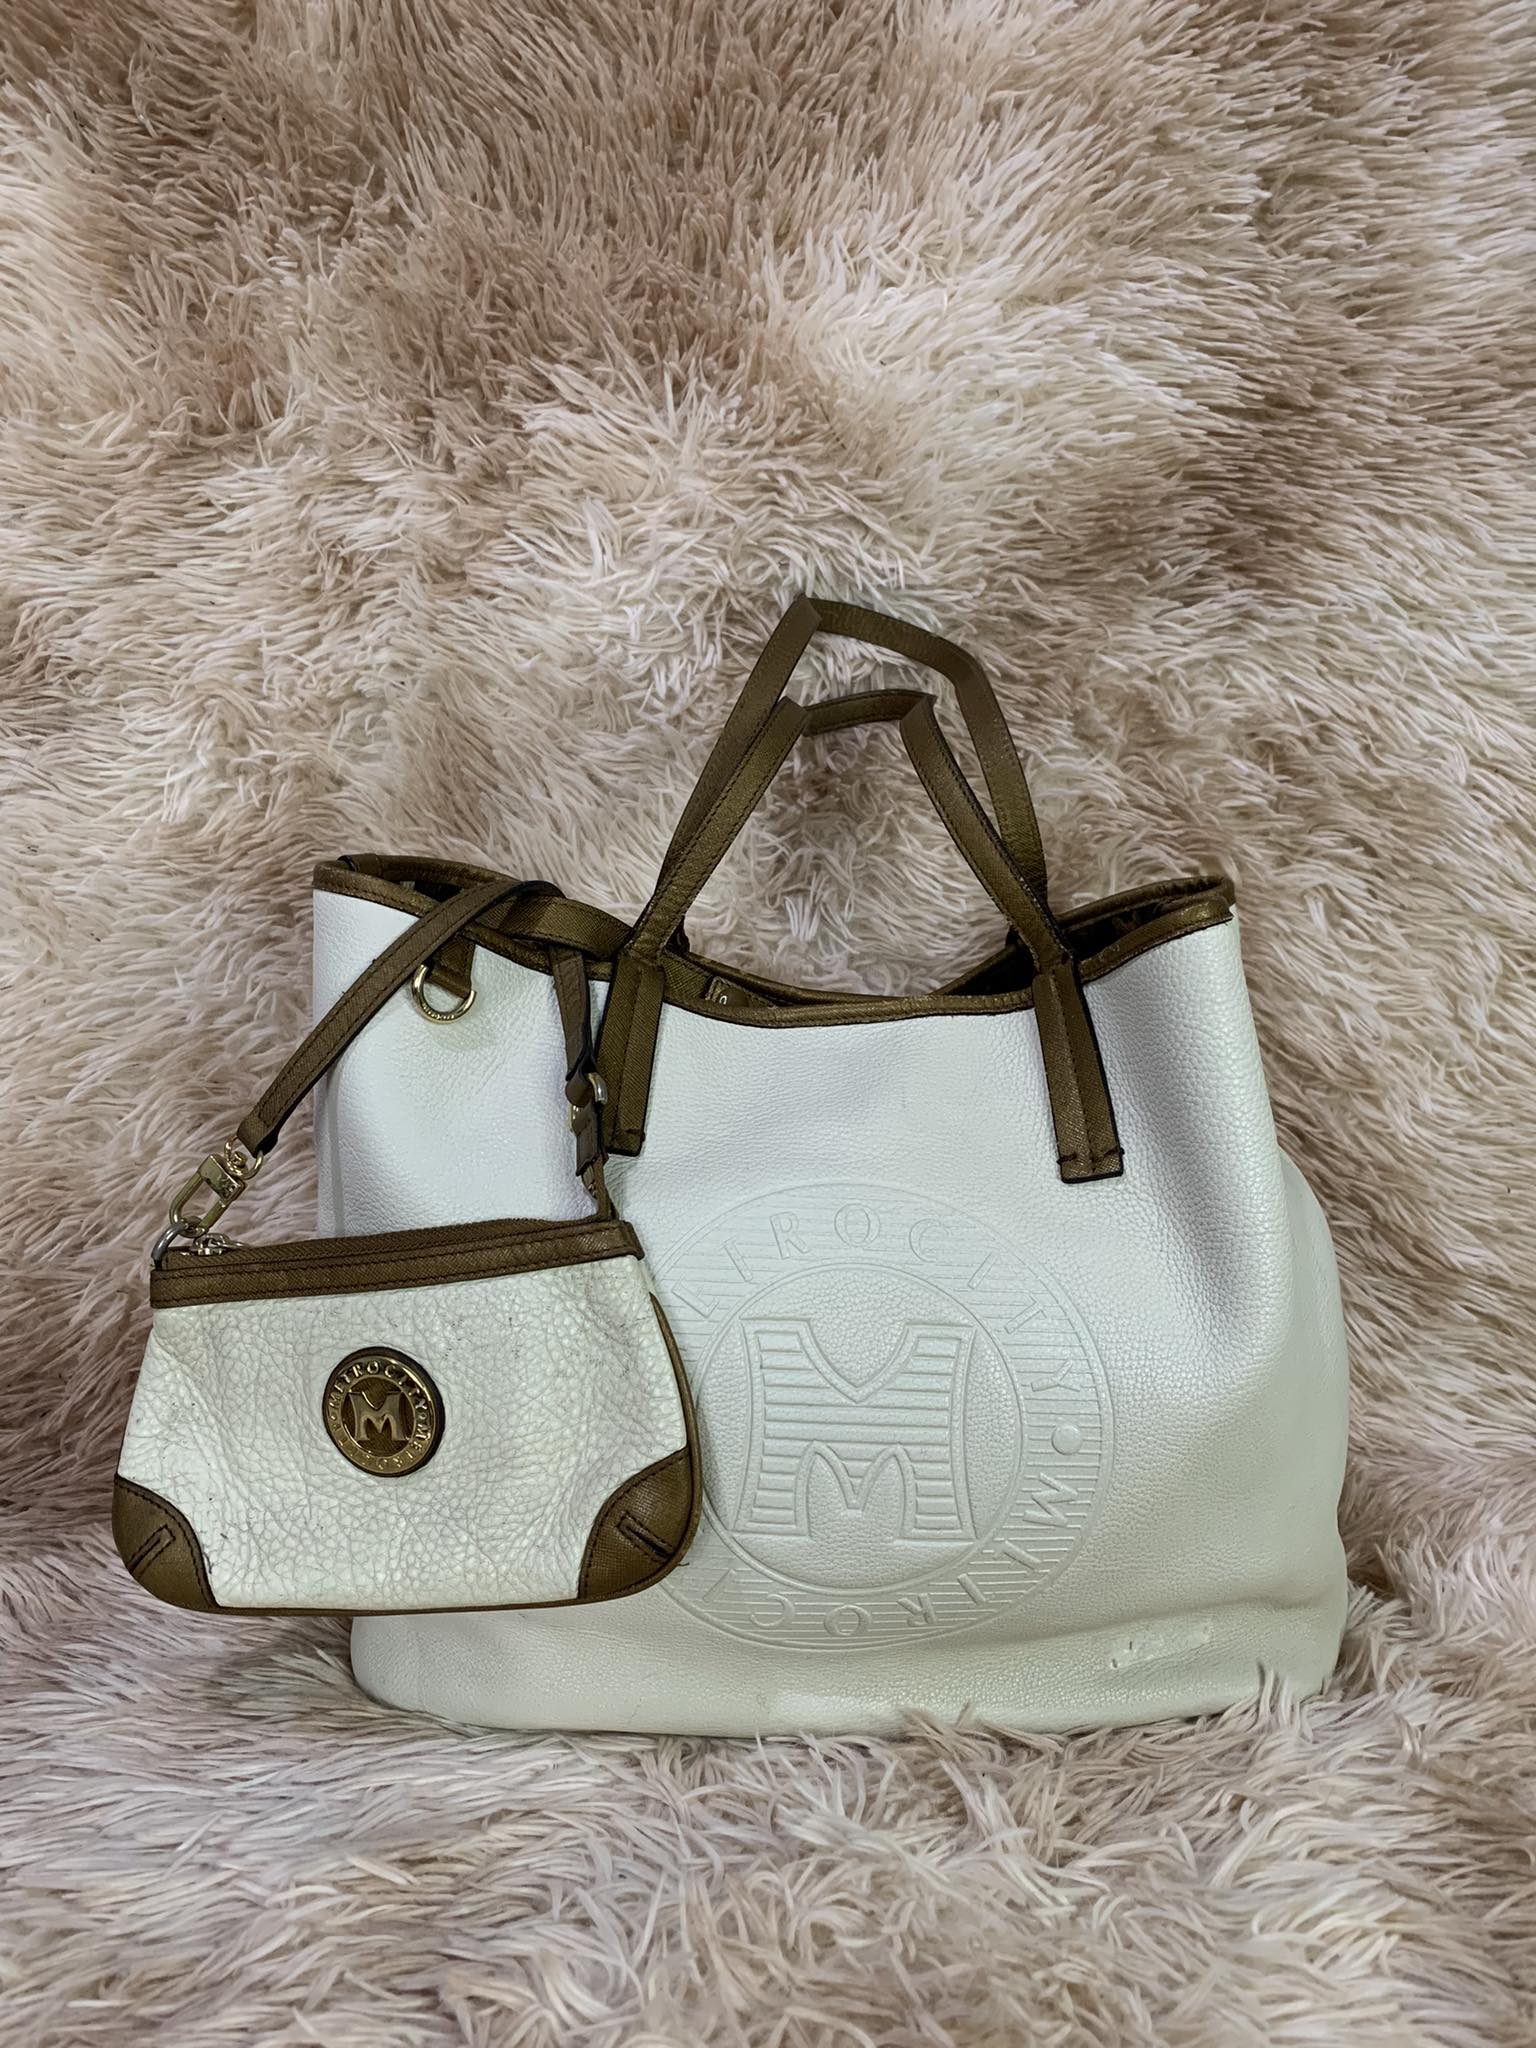 NEW ARRIVAL! Authentic Metrocity Shoulder Bag with wallet METRO